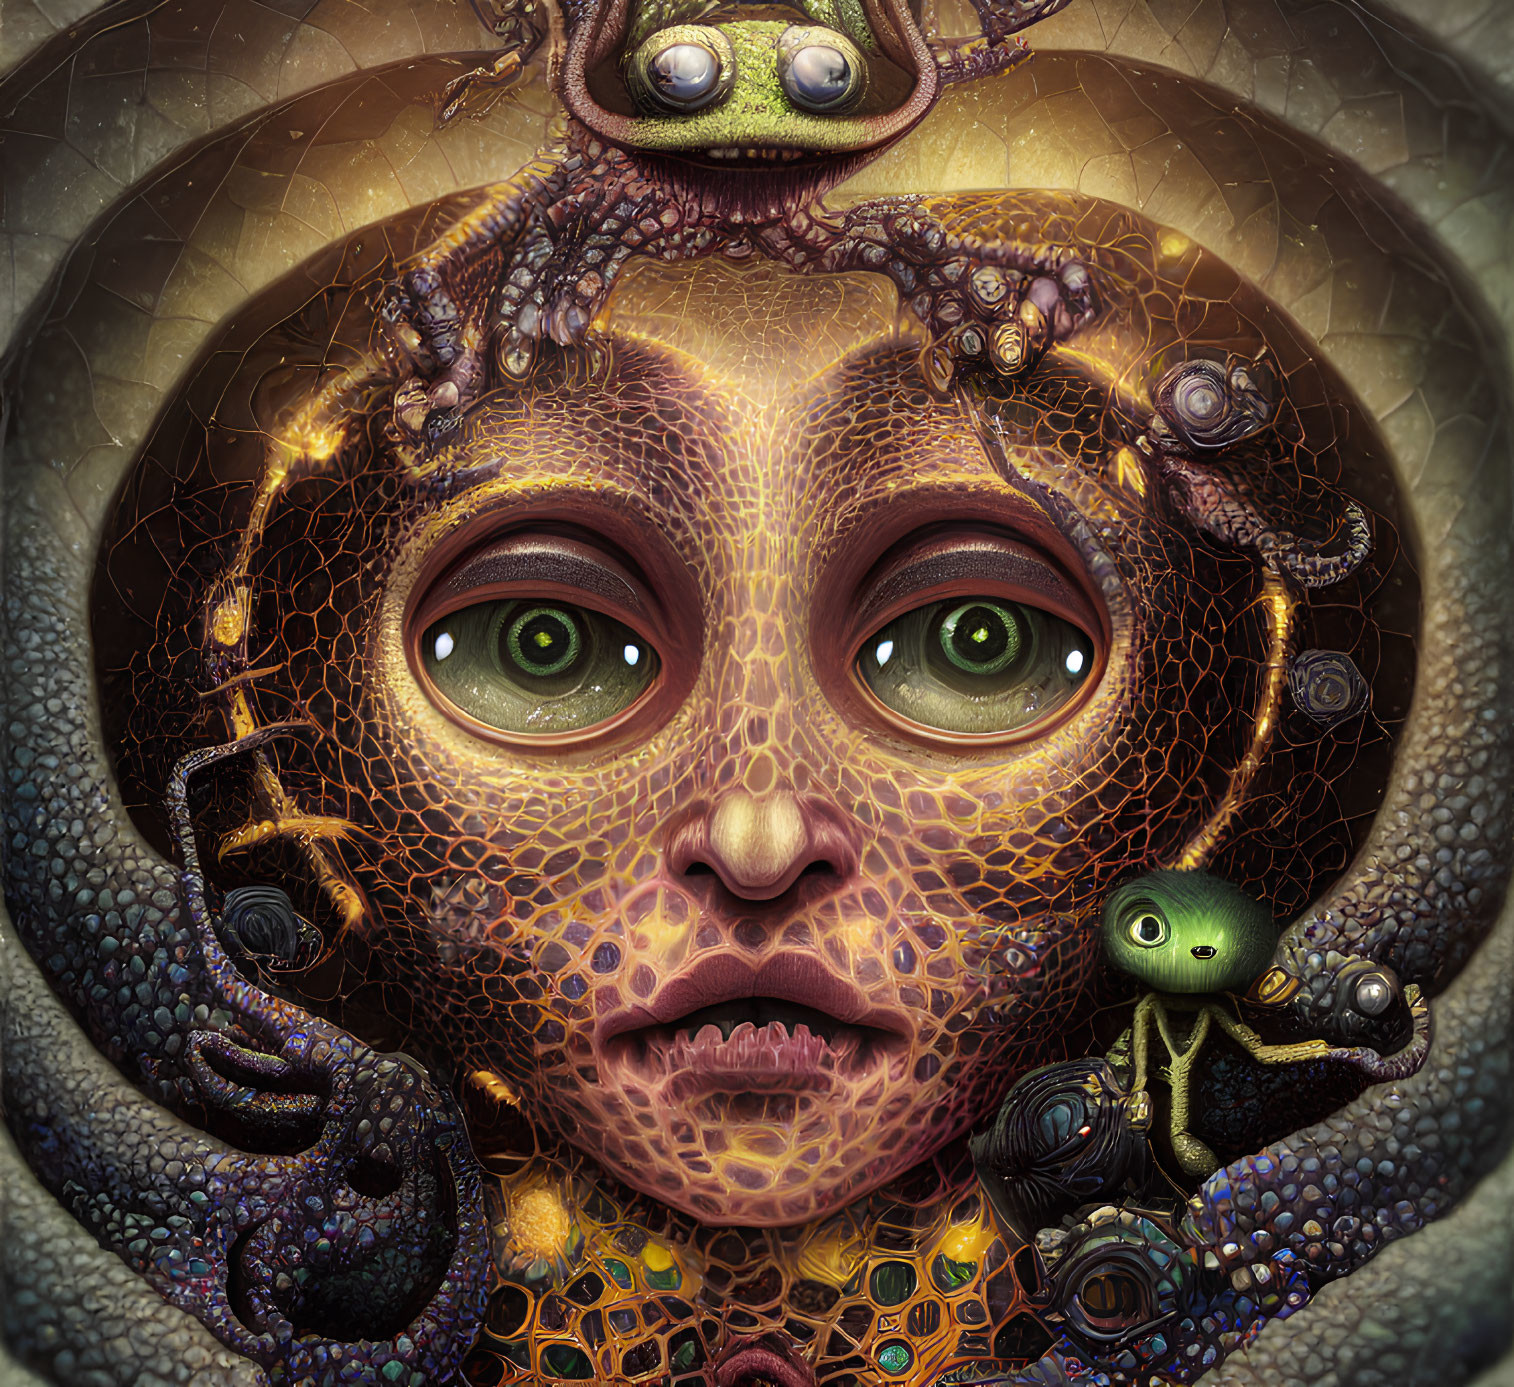 Surreal portrait of creature with green eyes, web-like skin, tentacles, and reptilian